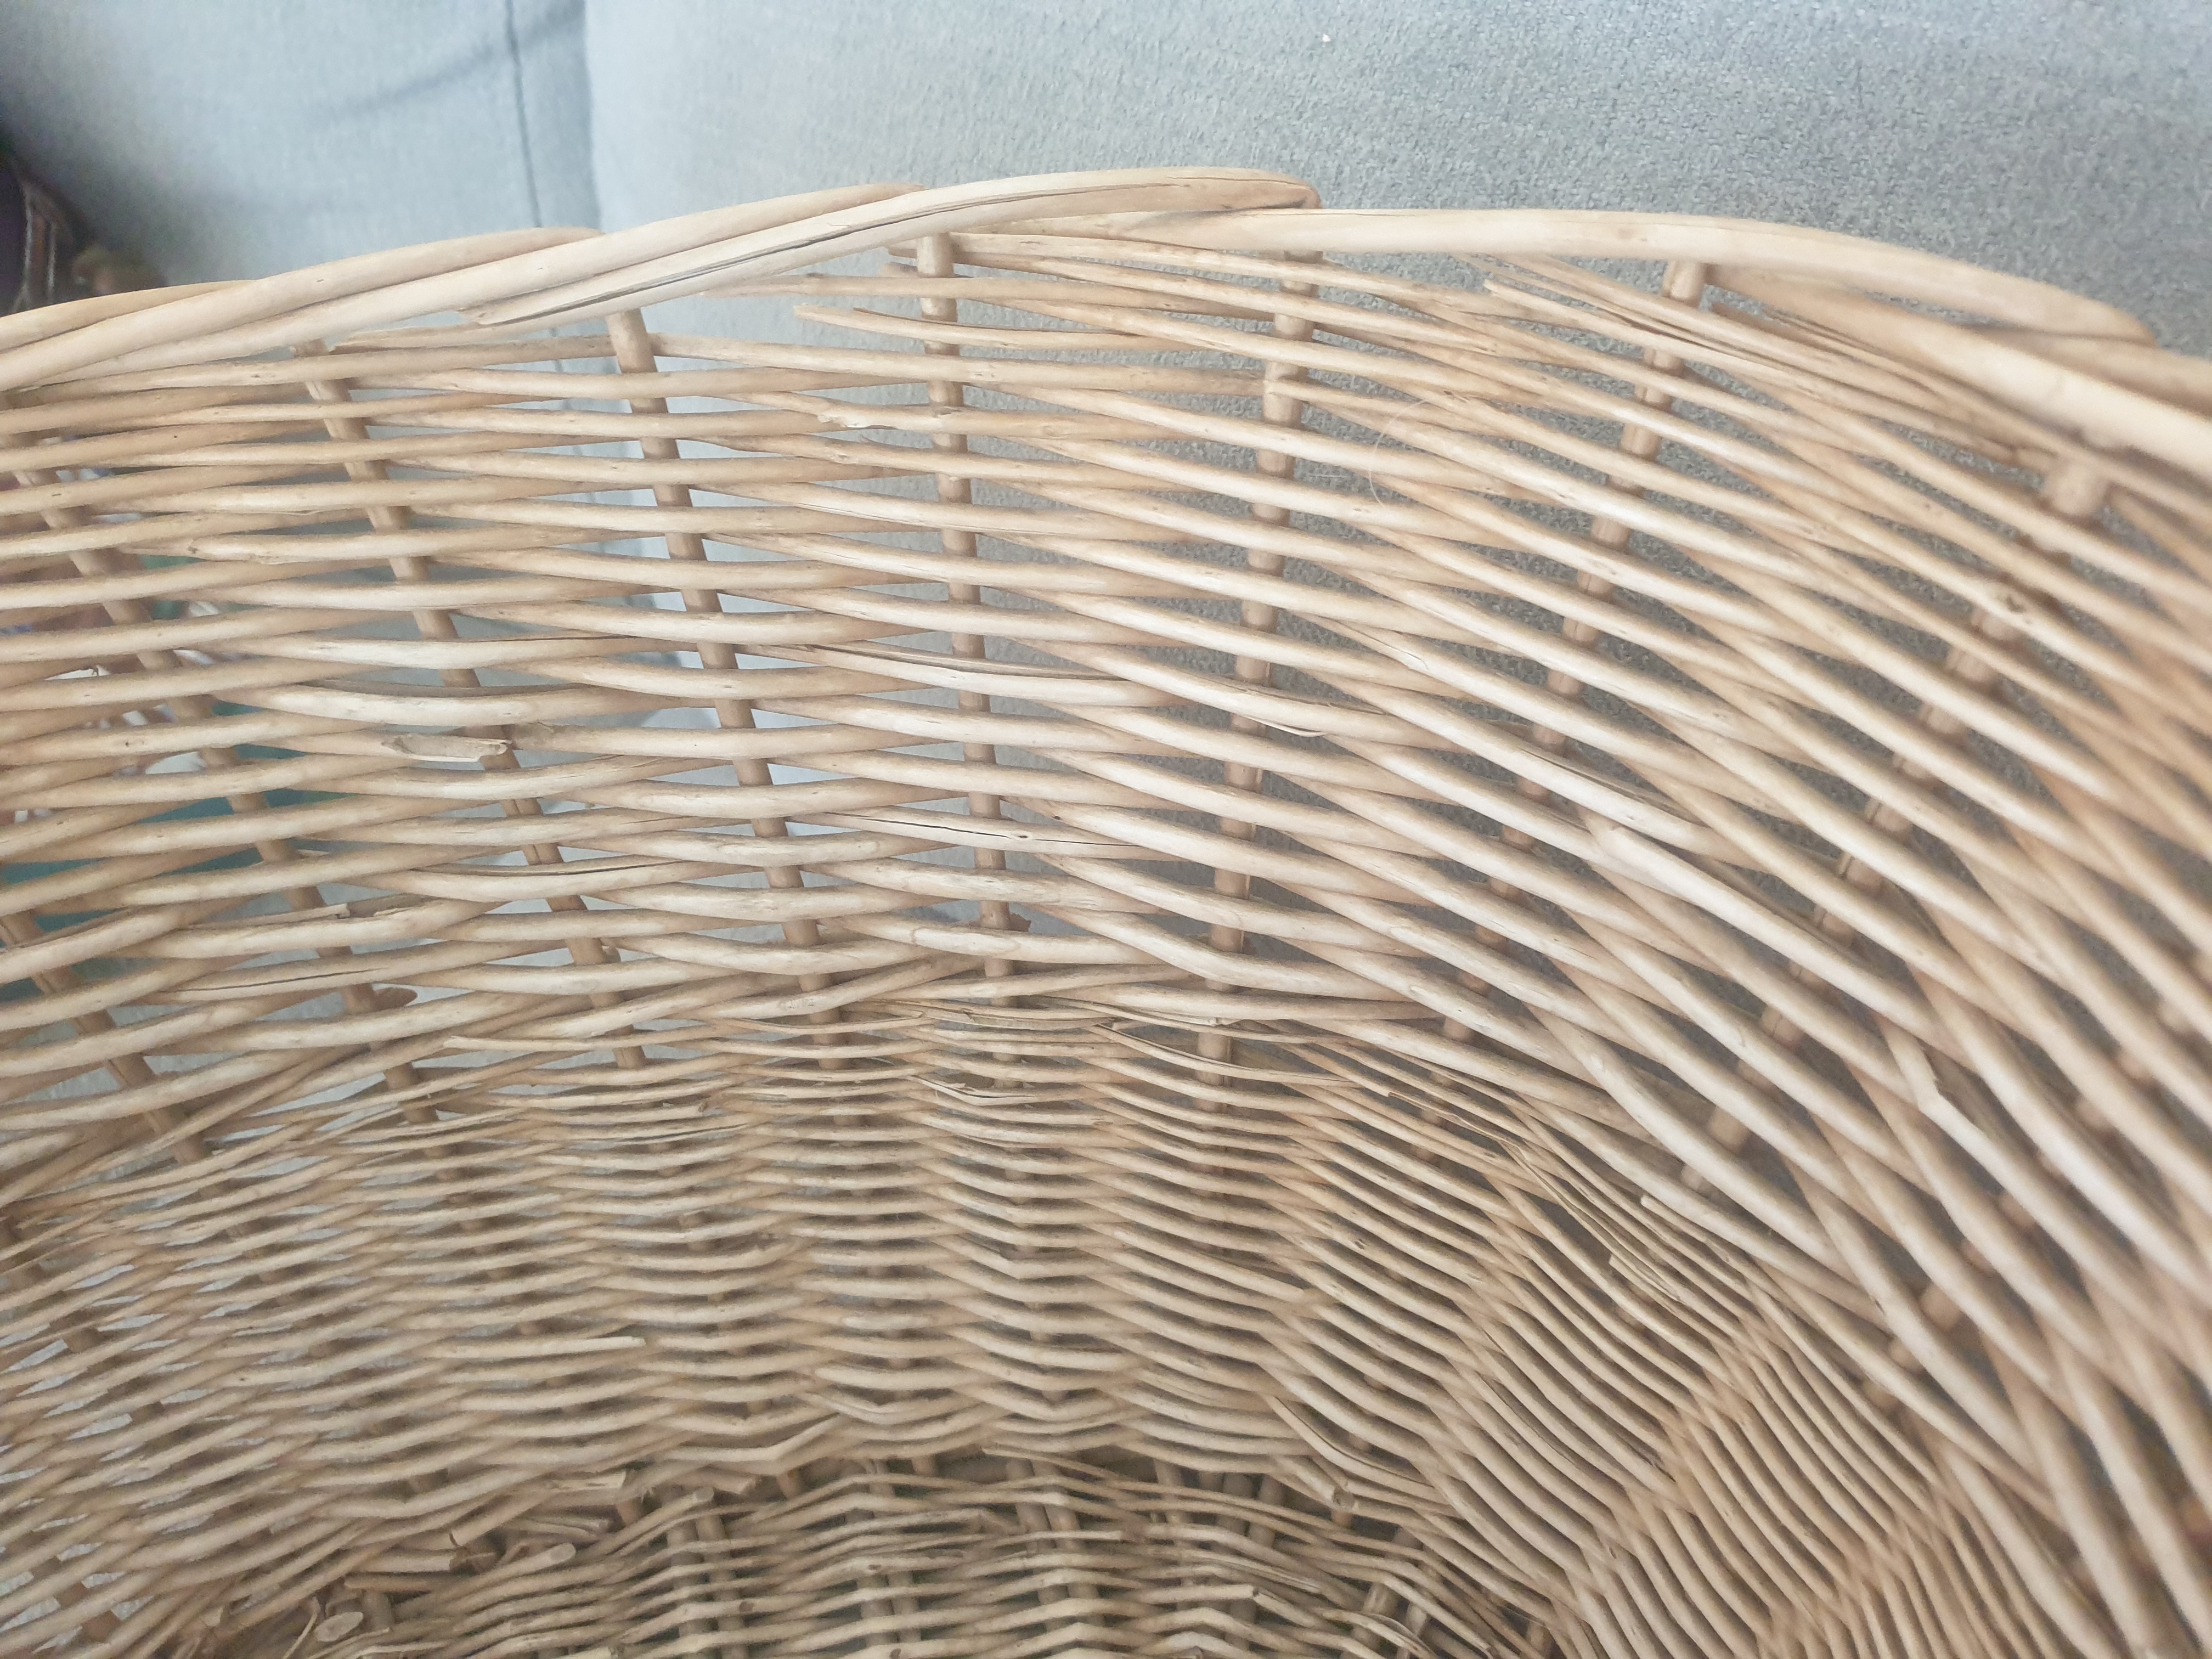 Close up on the inside of a wicker basket. There are no visible handles.